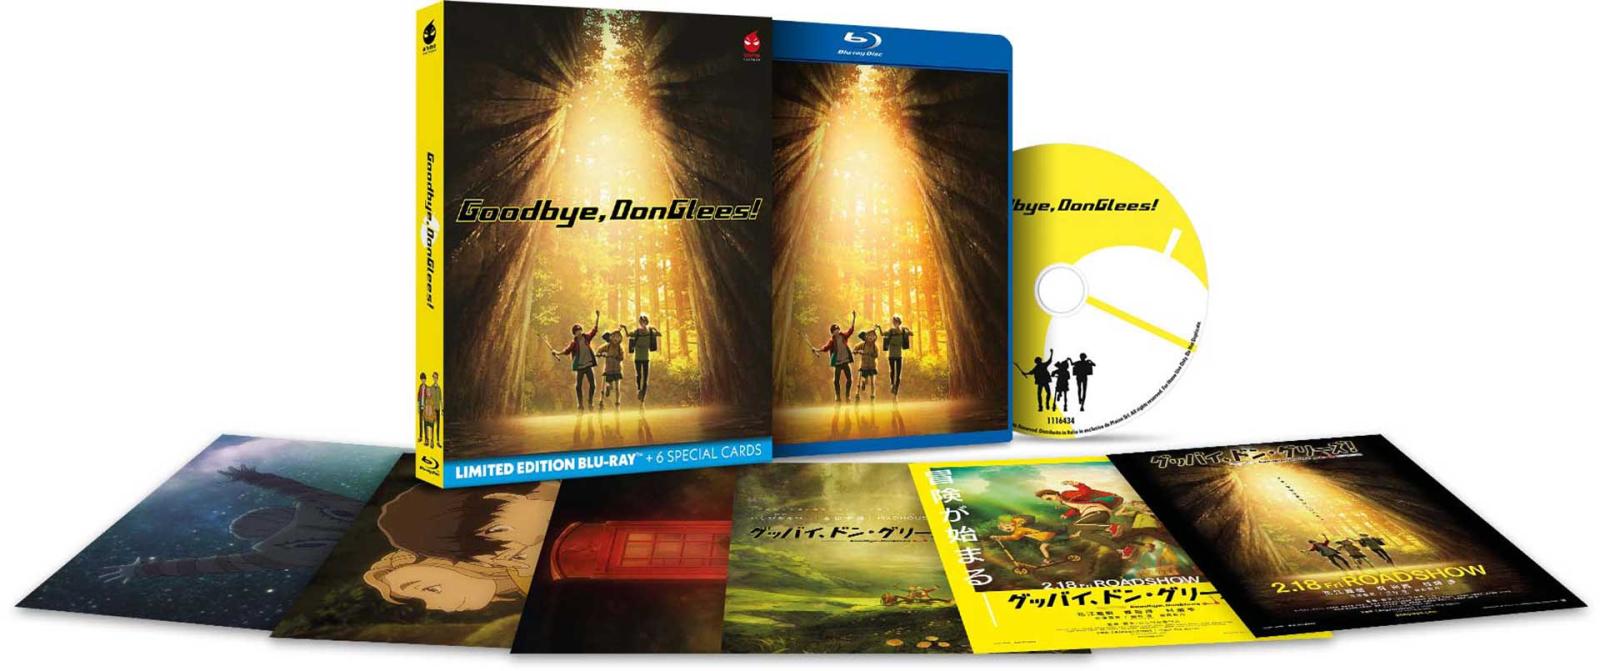 Goodbye, DonGless! - Limited Edition Blu-ray + 6 Special Cards (Blu-ray) Image 9